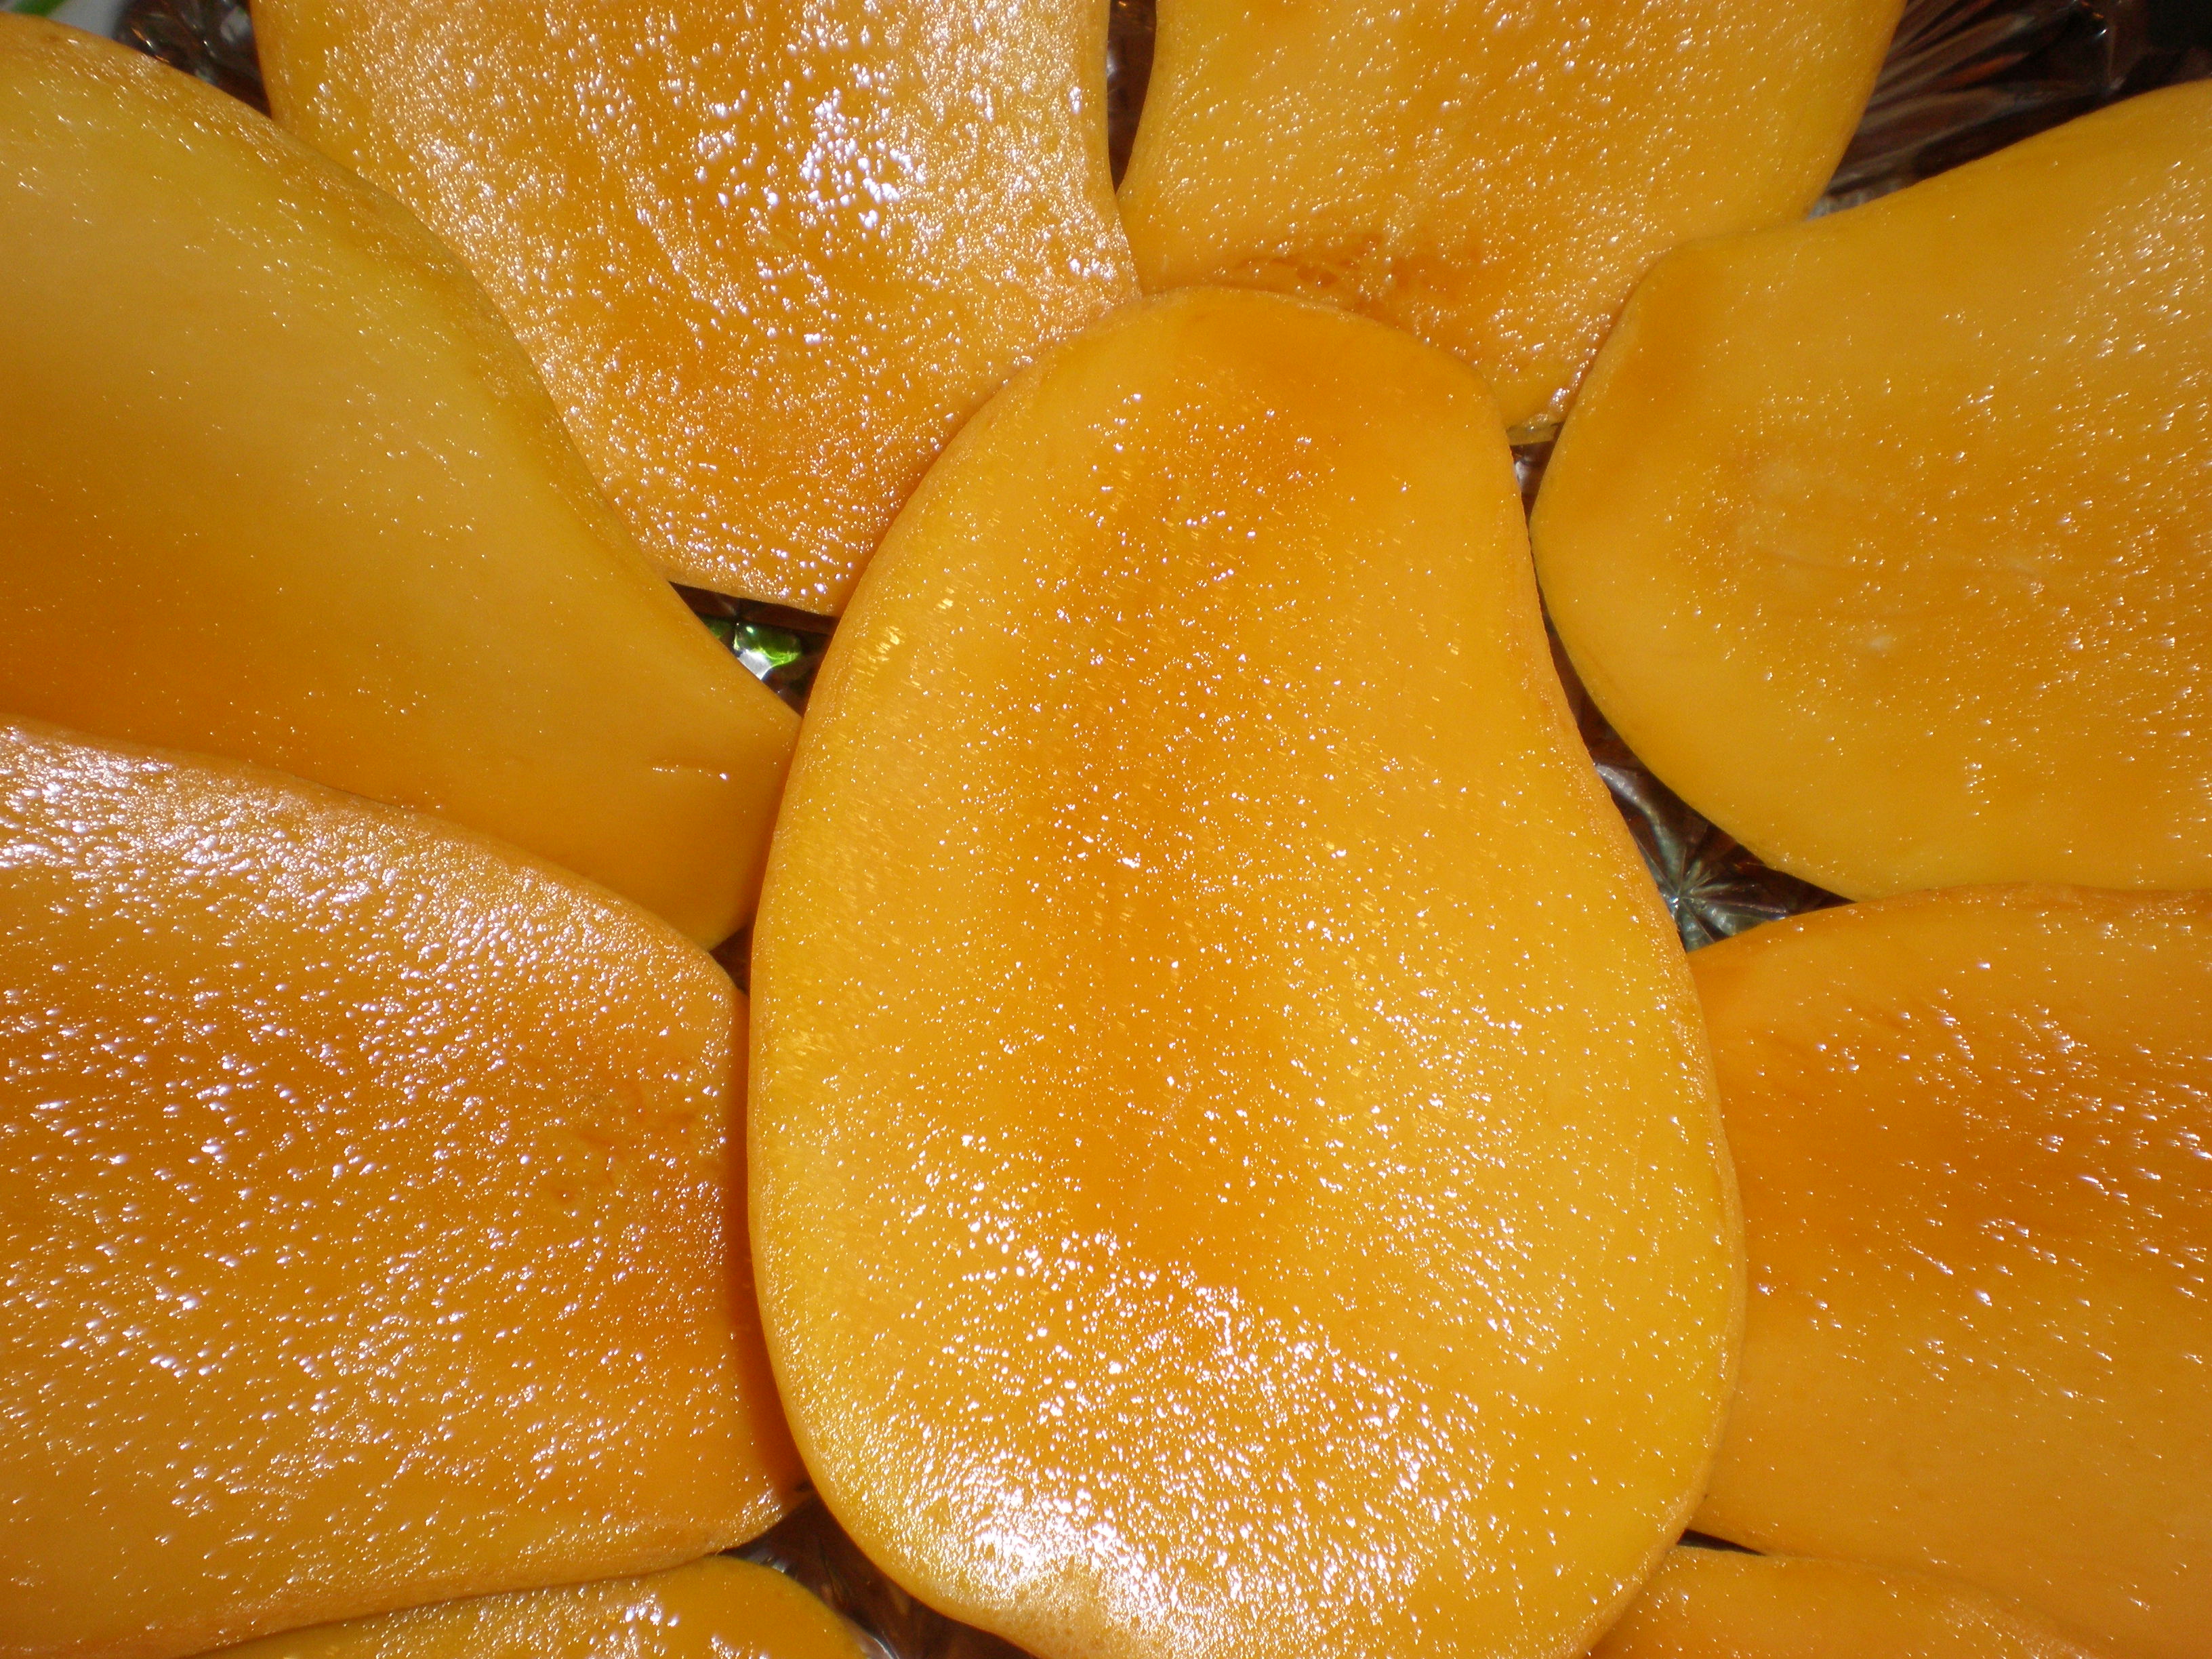 Sliced Mexican mangoes